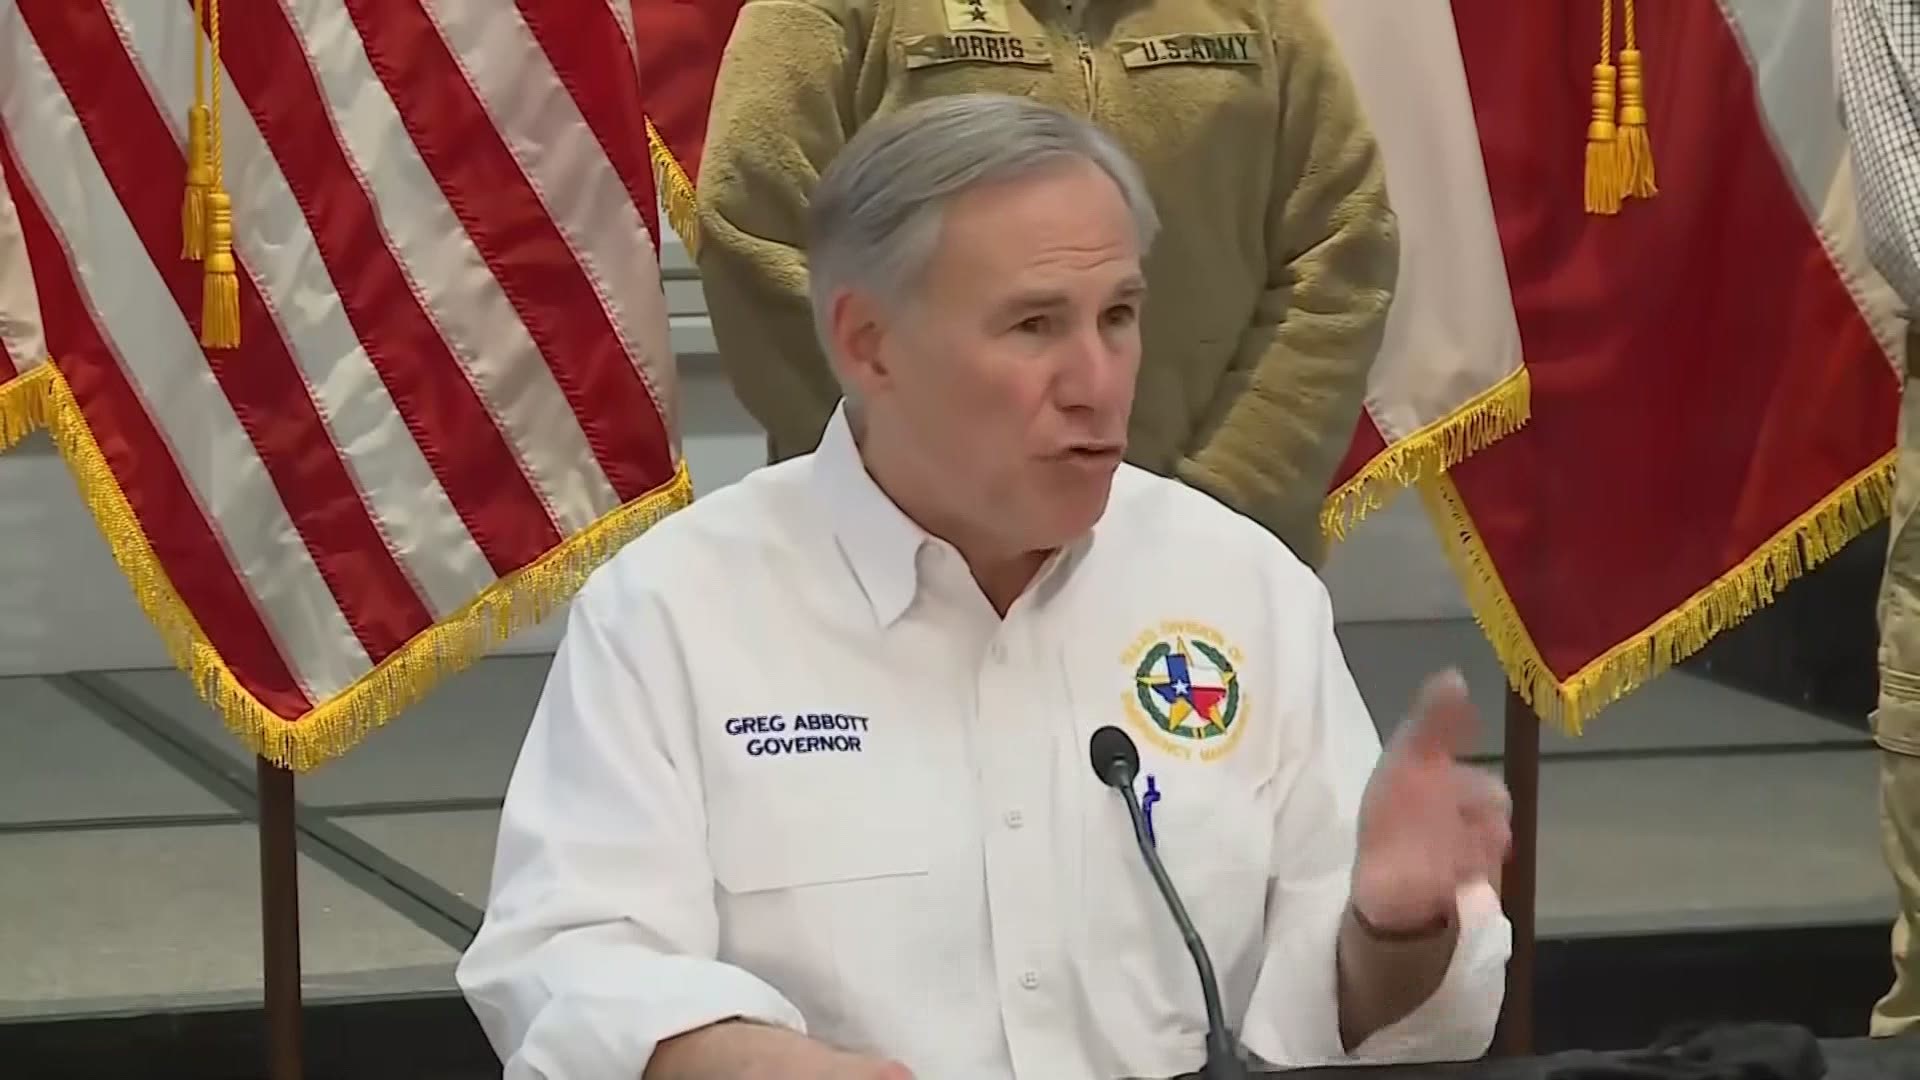 As winter storm recovery efforts continue across the state, Governor Greg Abbott laid out a plan to help Texans recover.